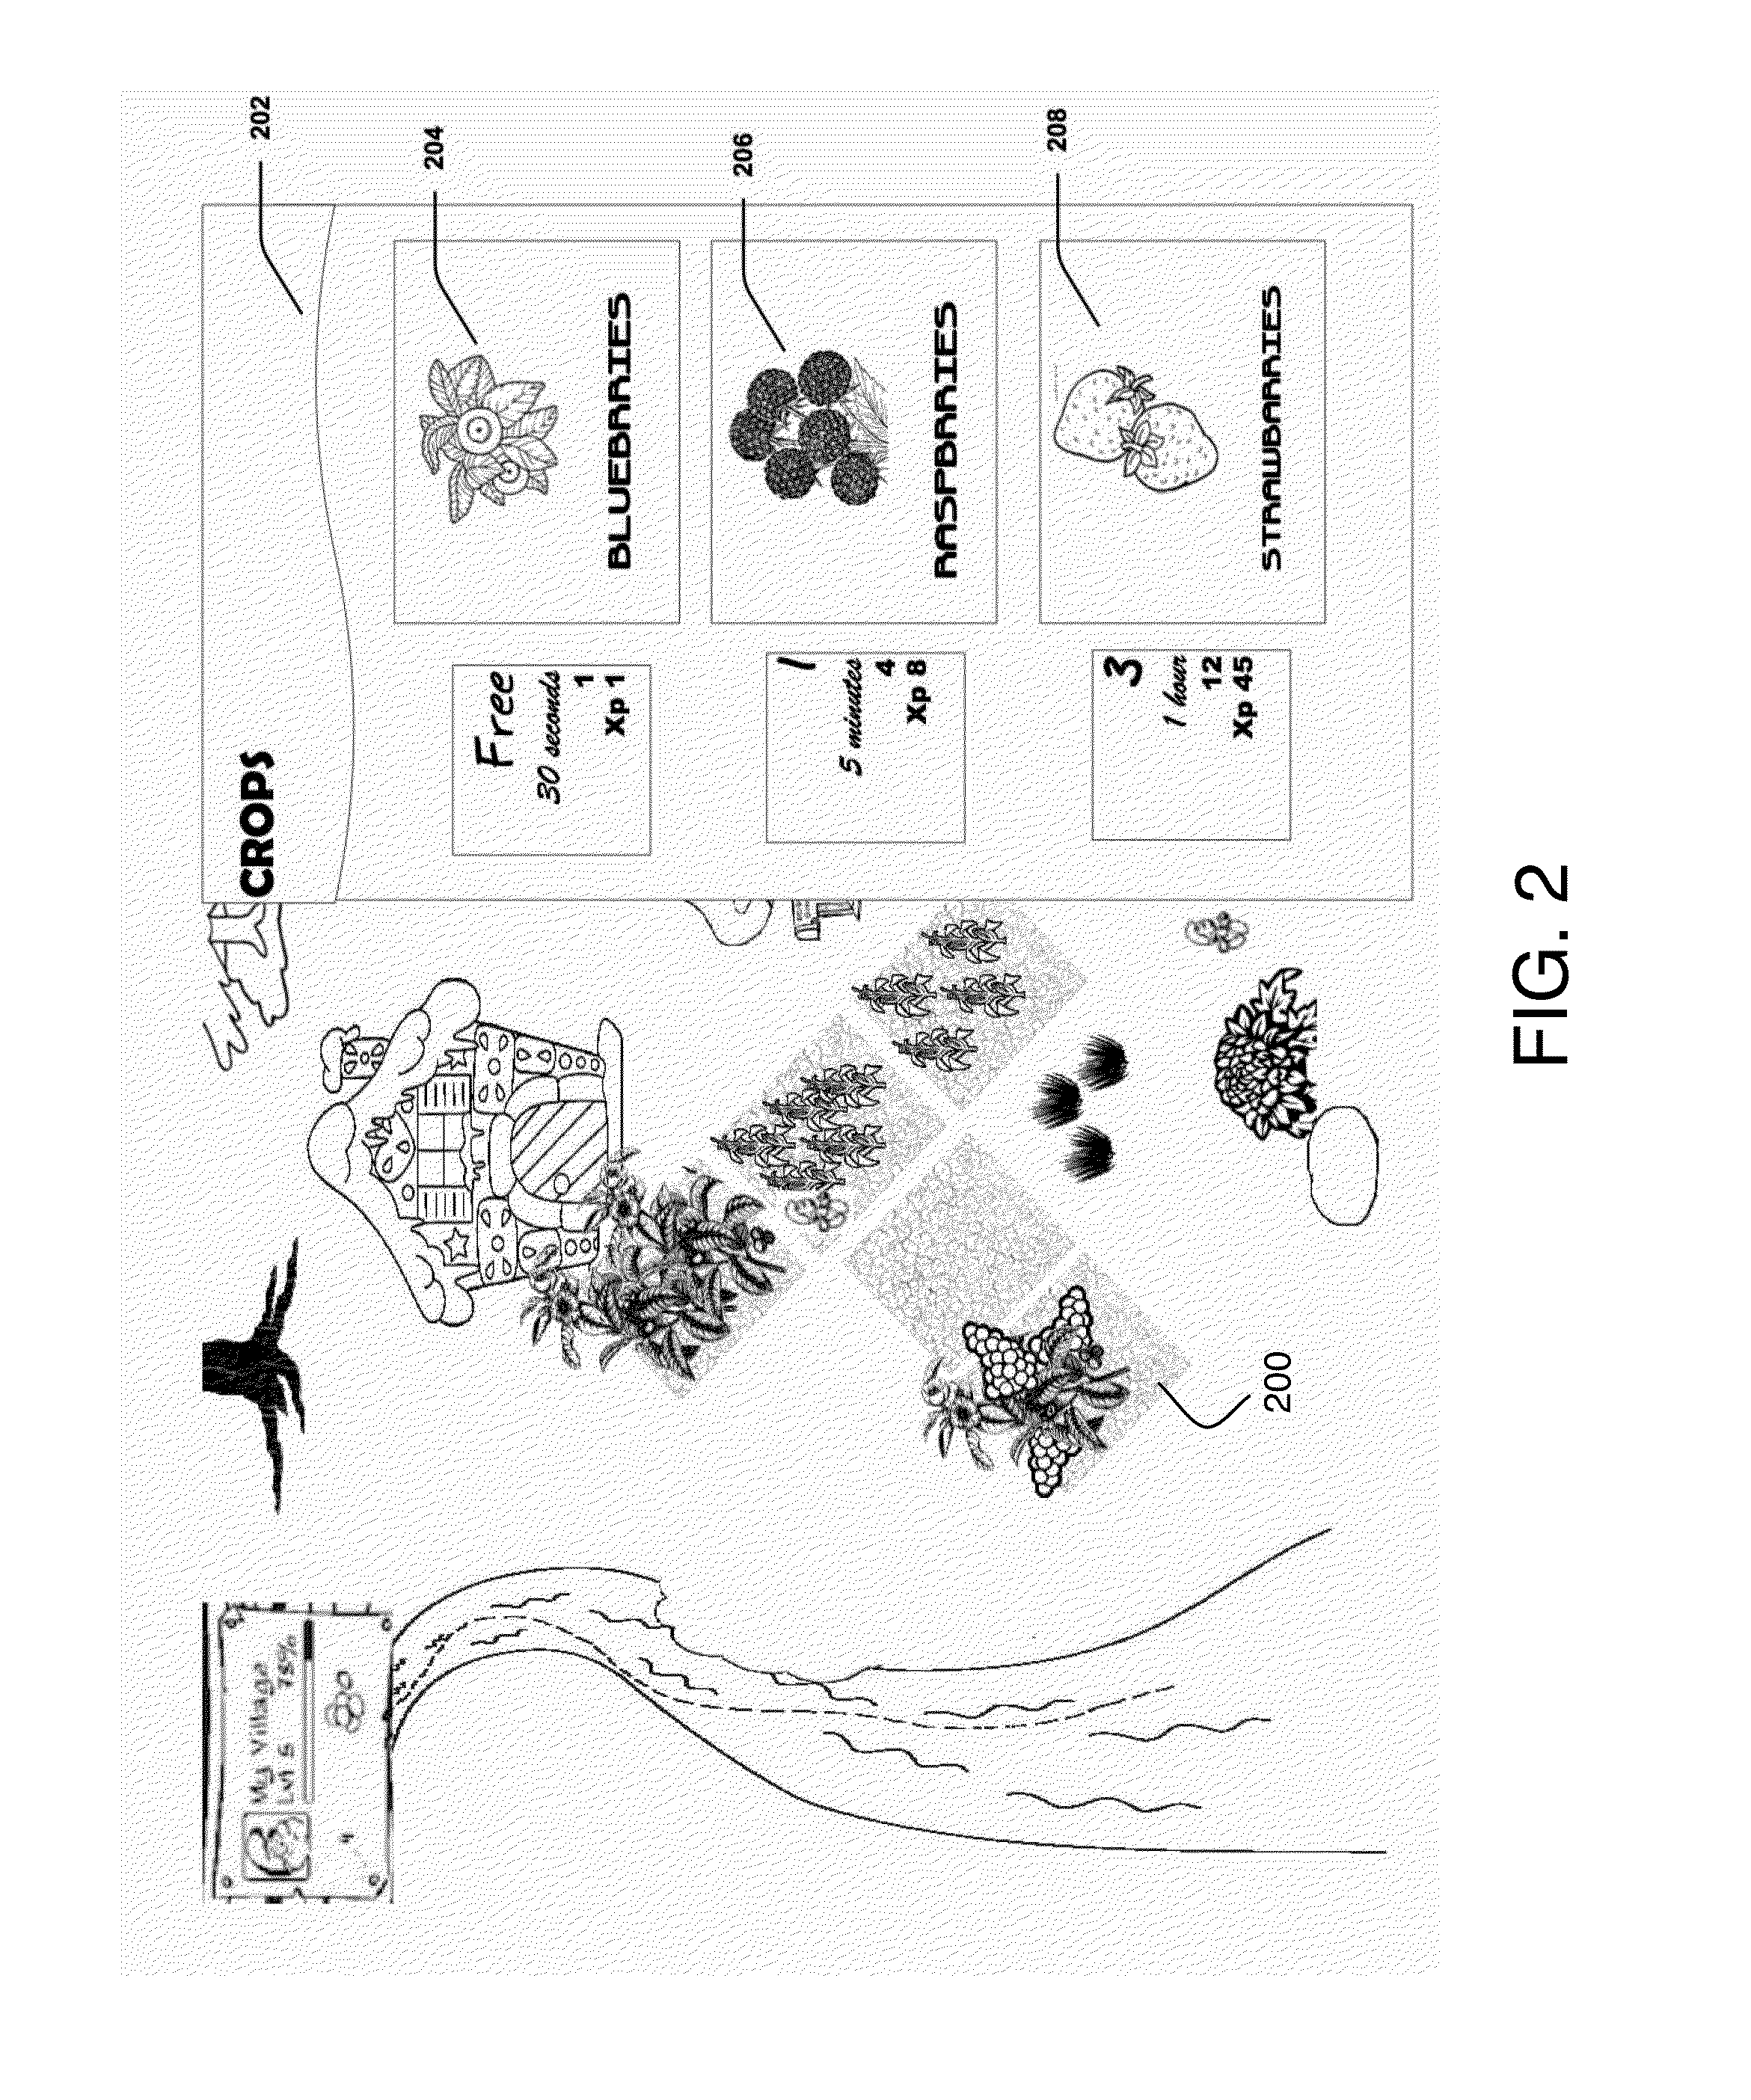 System, method and graphical user interface for controlling a game